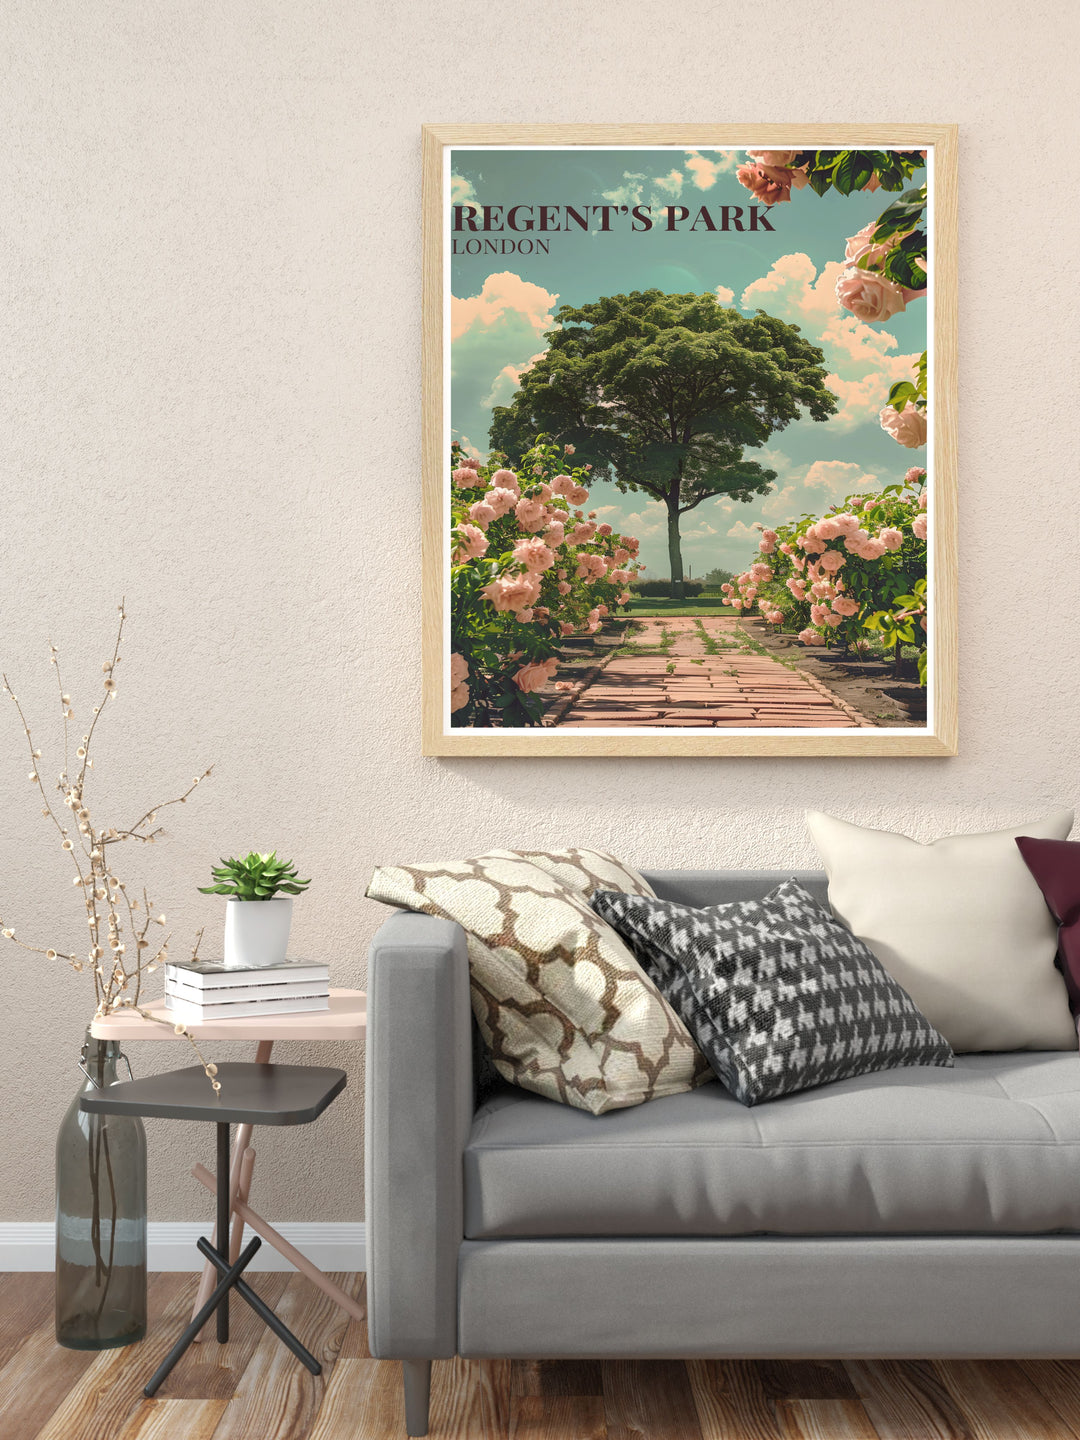 Regents Park Framed Art highlighting the serene atmosphere and picturesque pathways of this iconic London park.